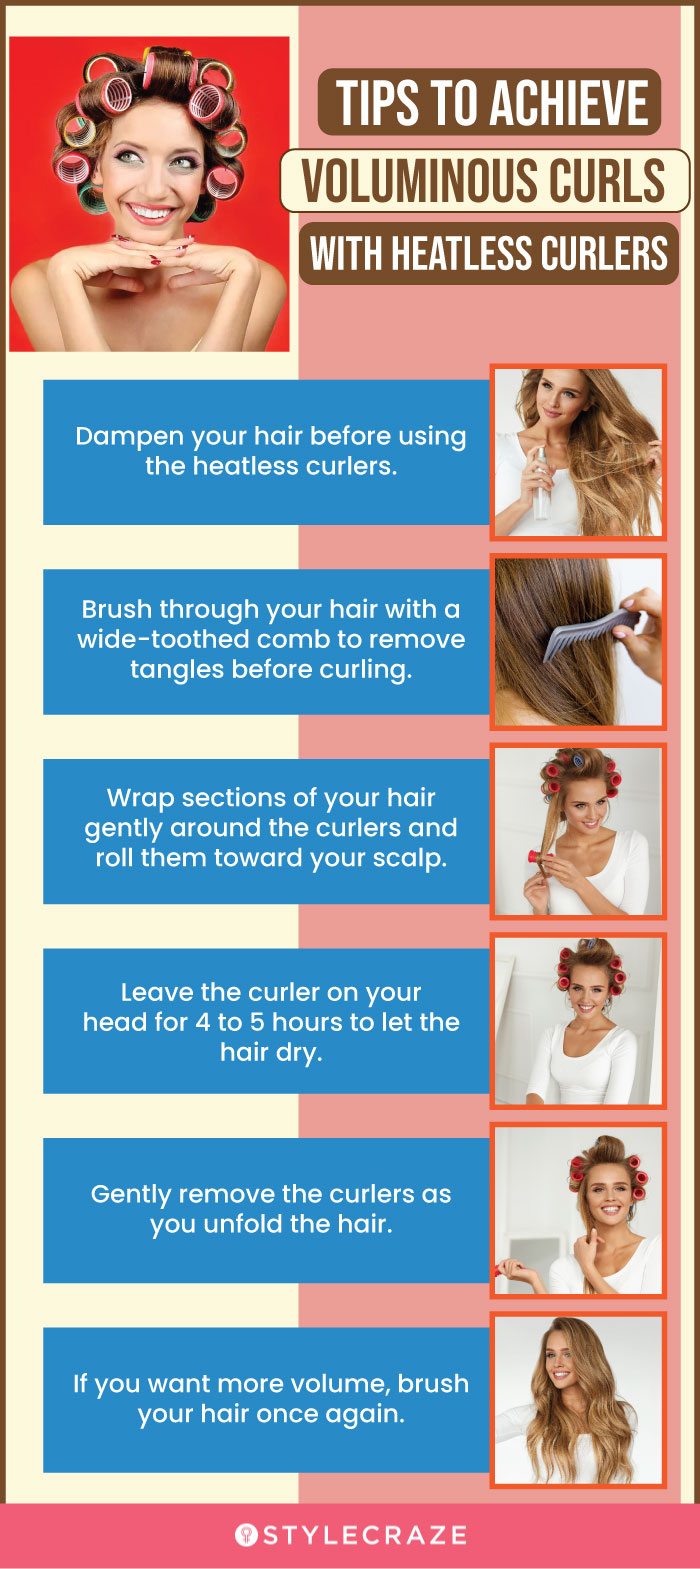 How To Use Heatless Curlers And Their Benefits (infographic)